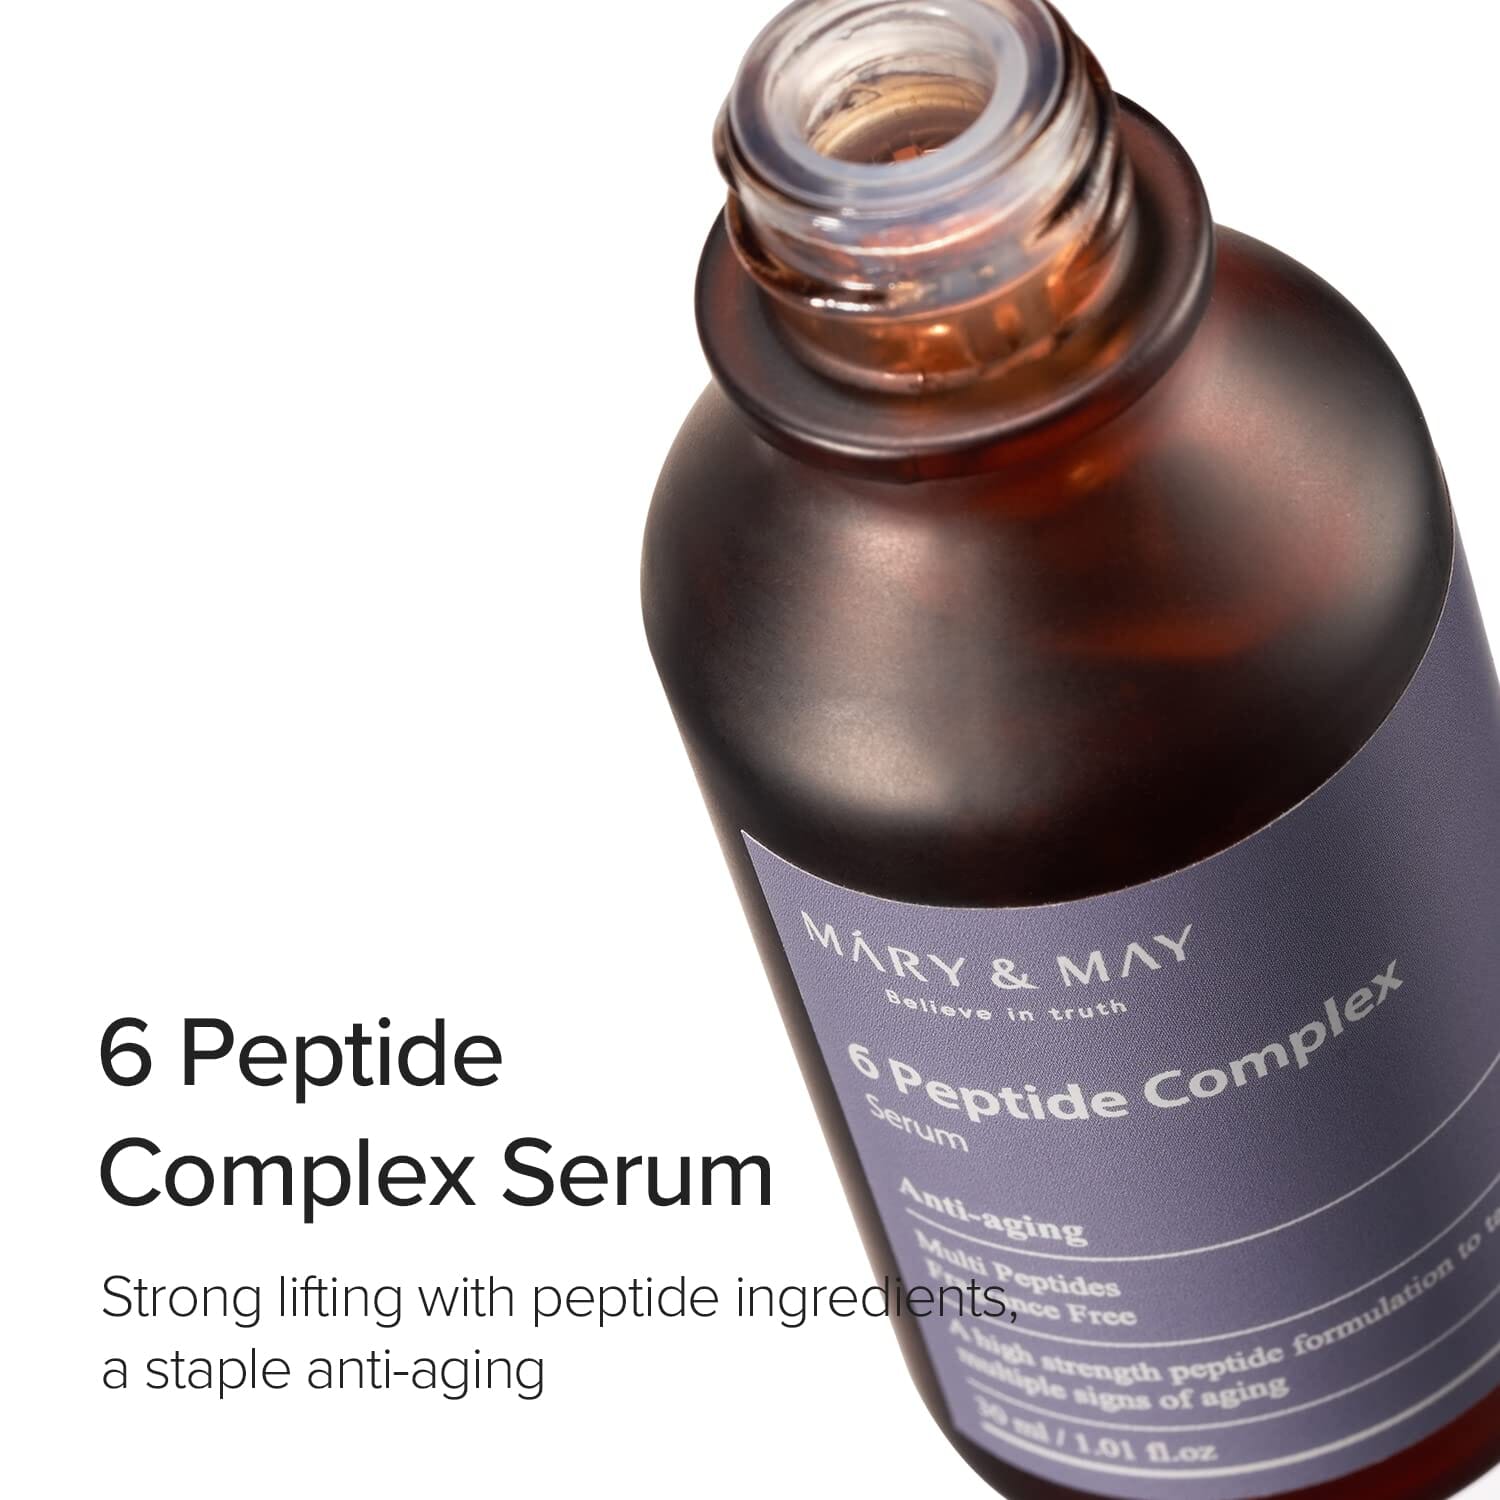 Mary&amp;May 6 Peptide Complex Serum 30ml Skin Care Mary&amp;May ORION XO Sri Lanka